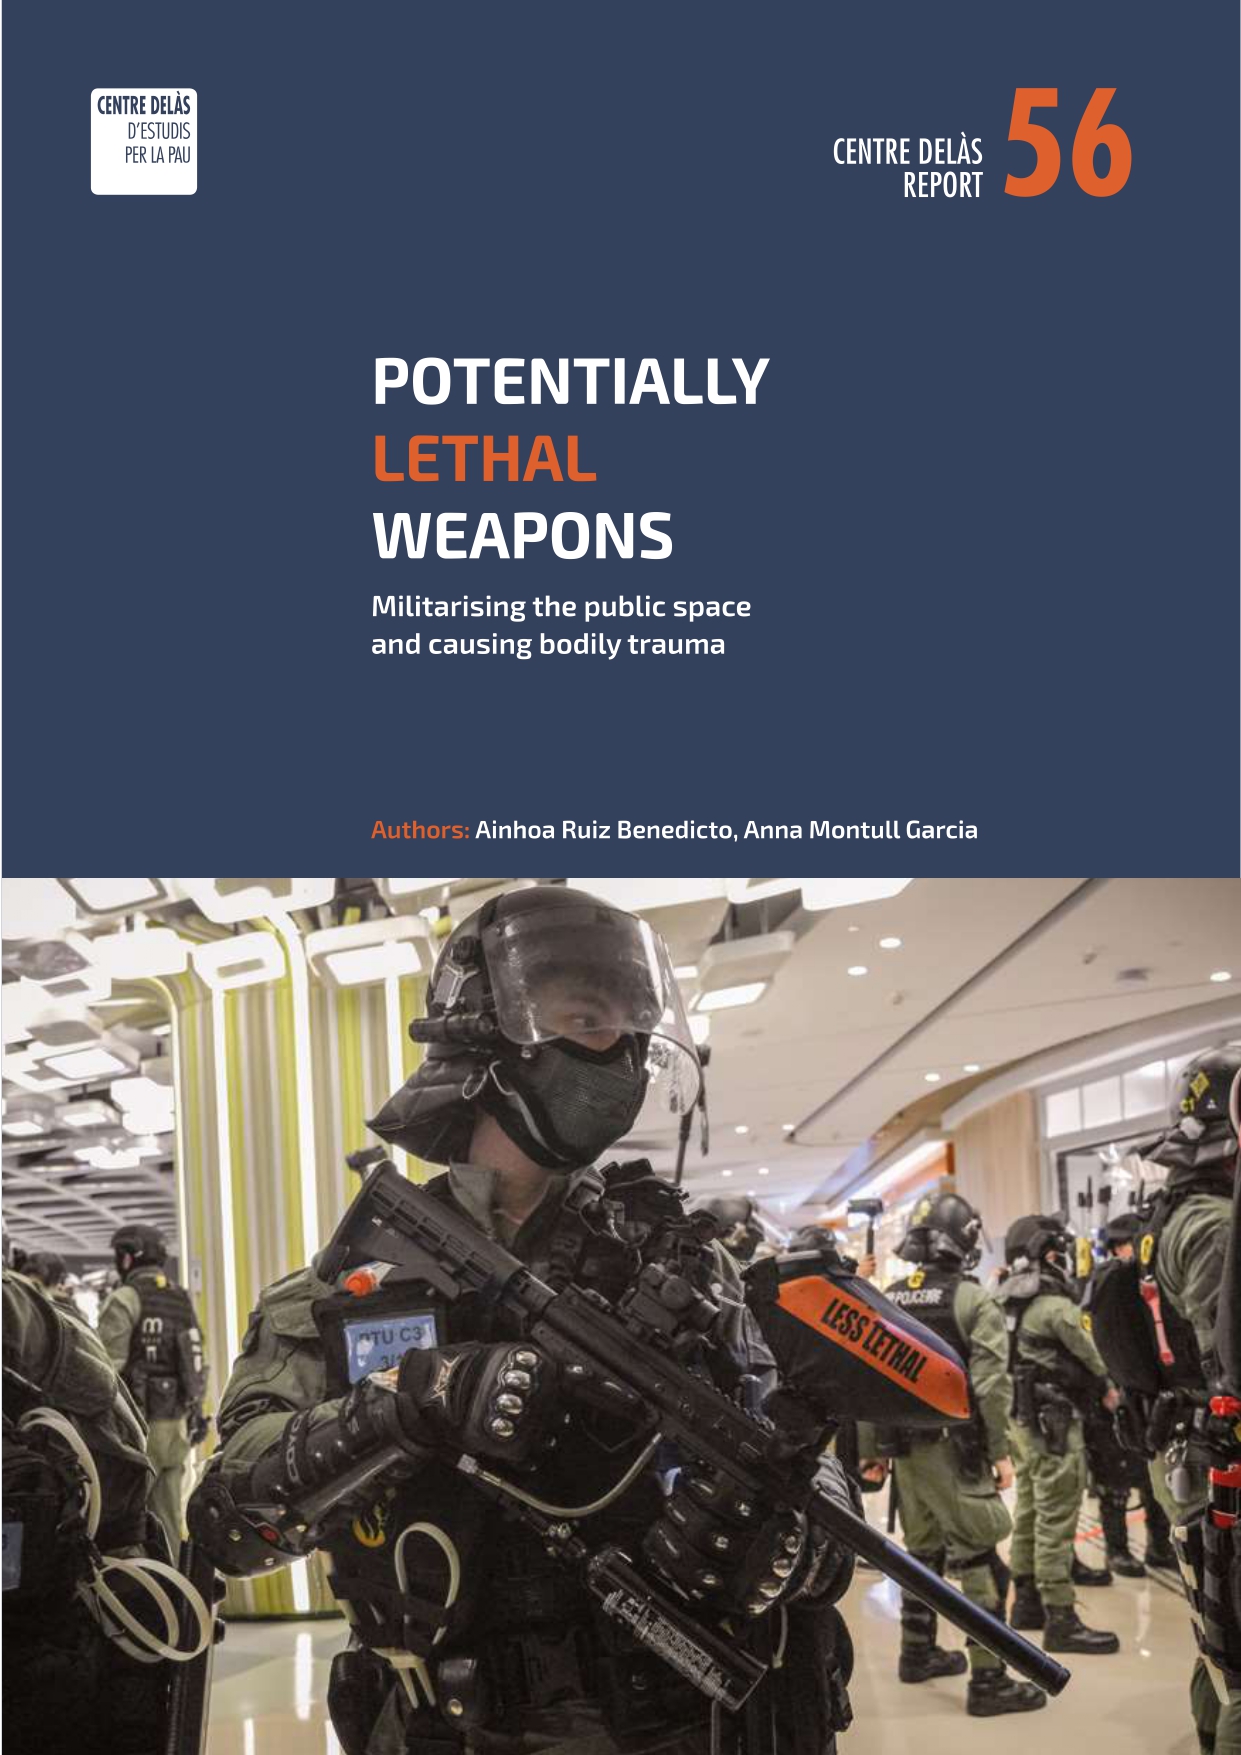 Report 56: “Potentially Lethal Weapons. Militarizing public space and traumatizing bodies”